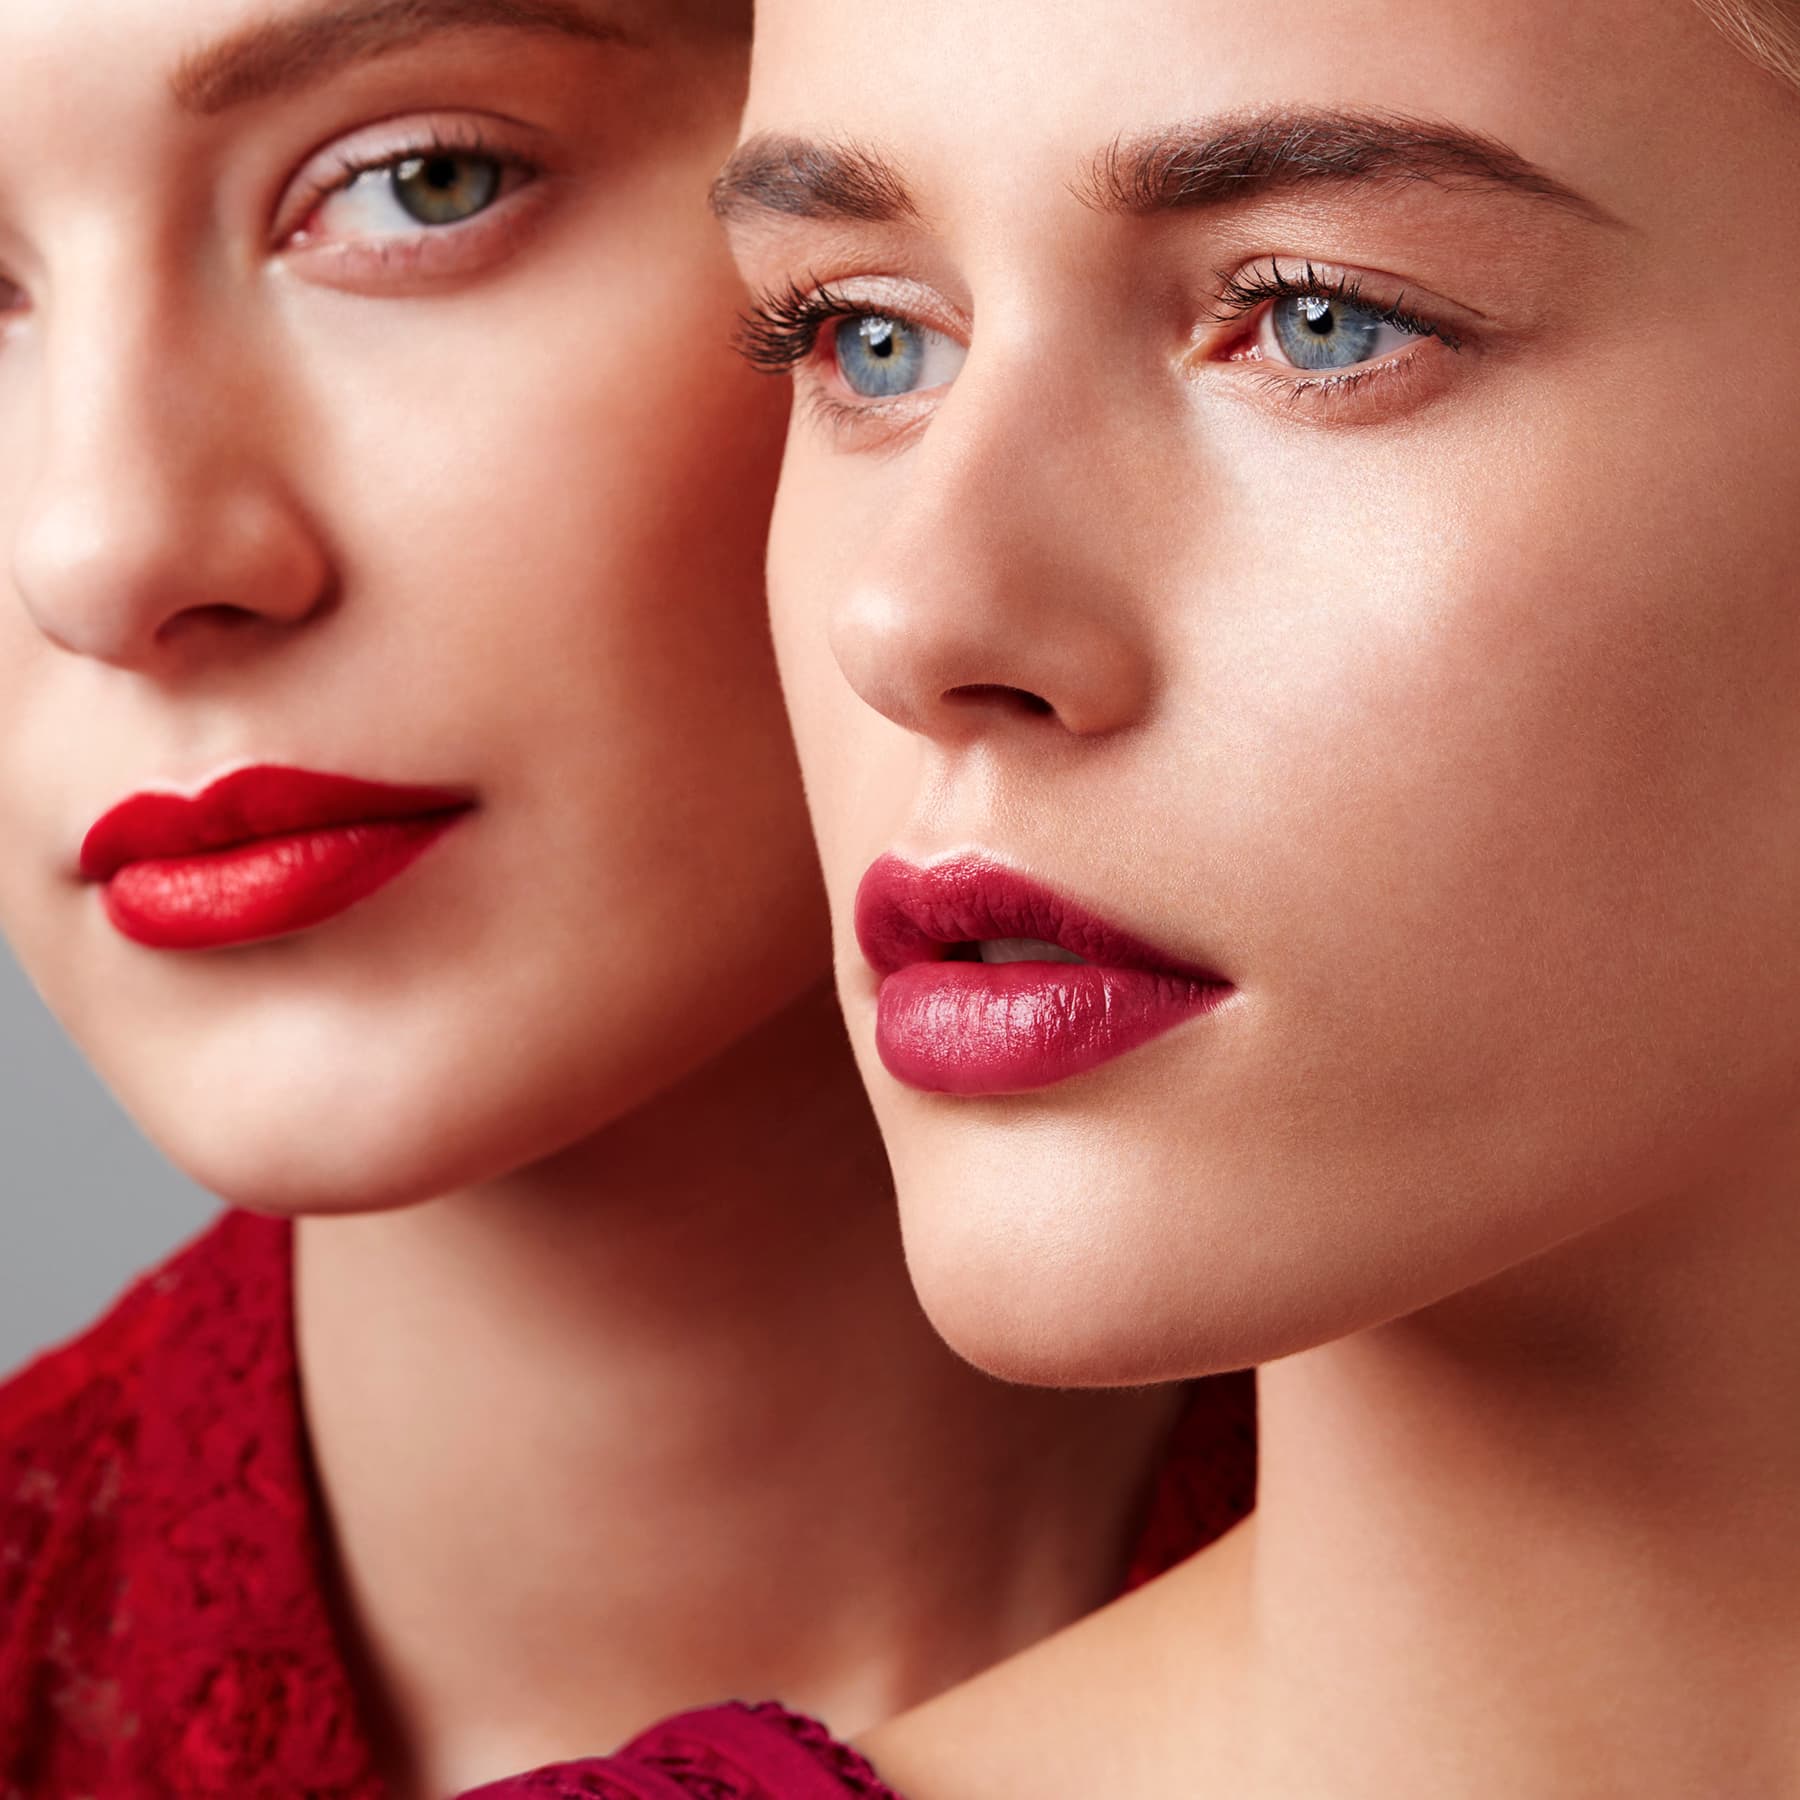 CLOSE UP OF TWO YOUNG WOMAN RED LIPSTICK